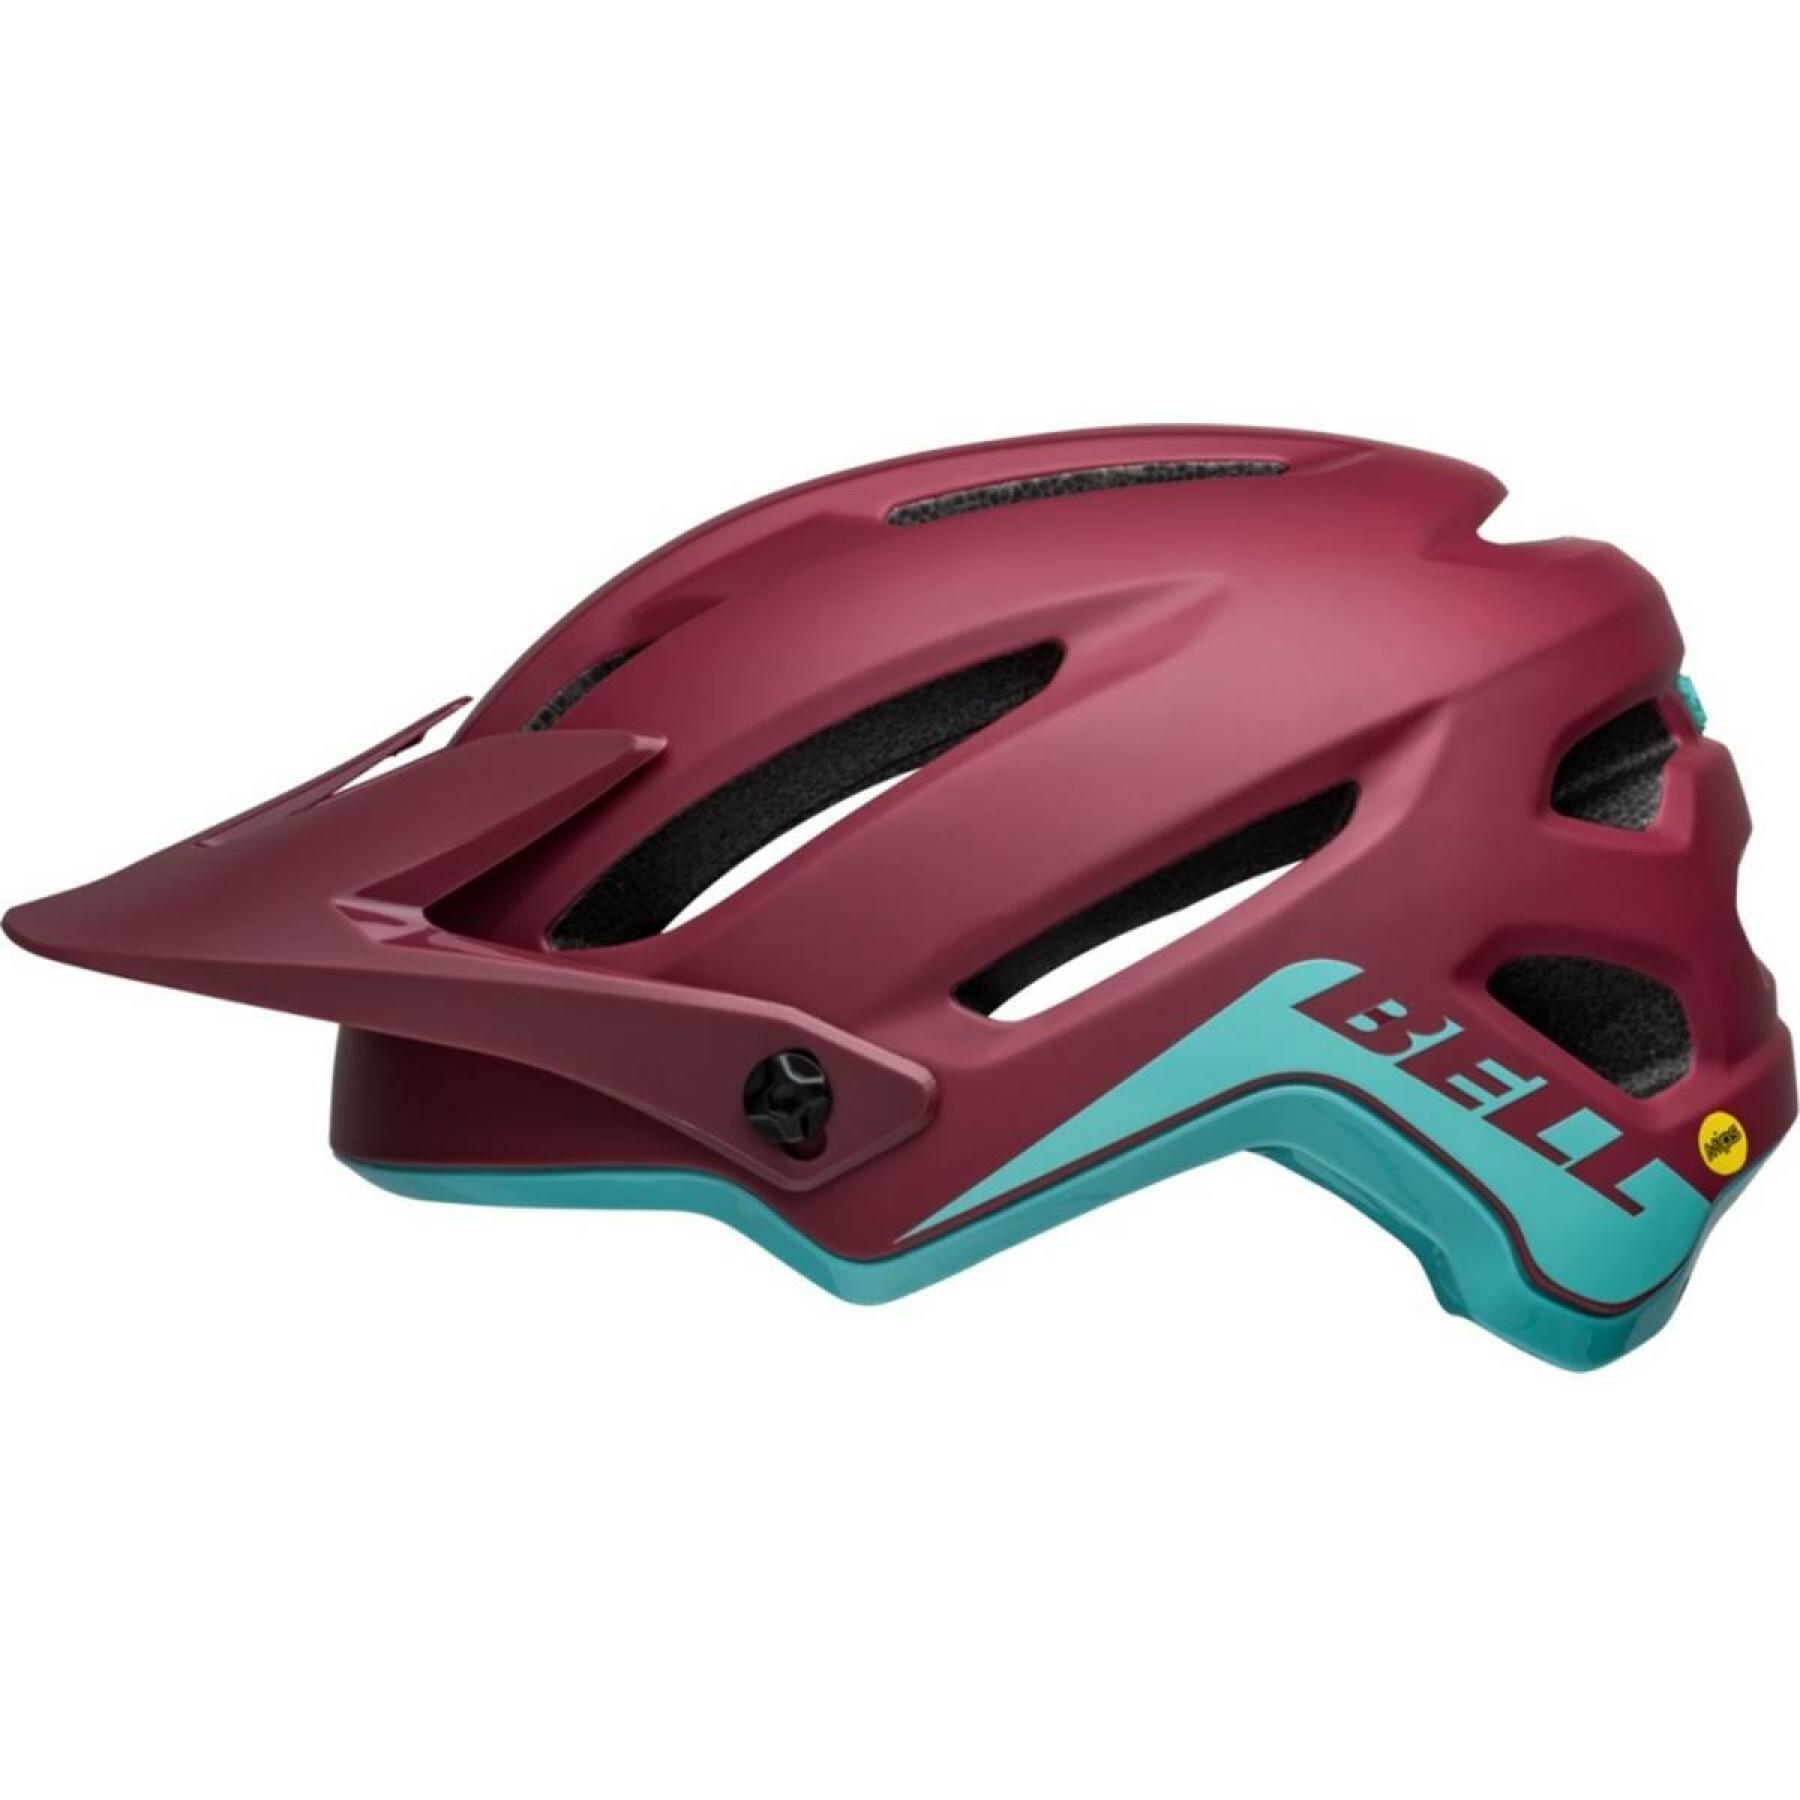 Casque vélo Bell 4forty Mips